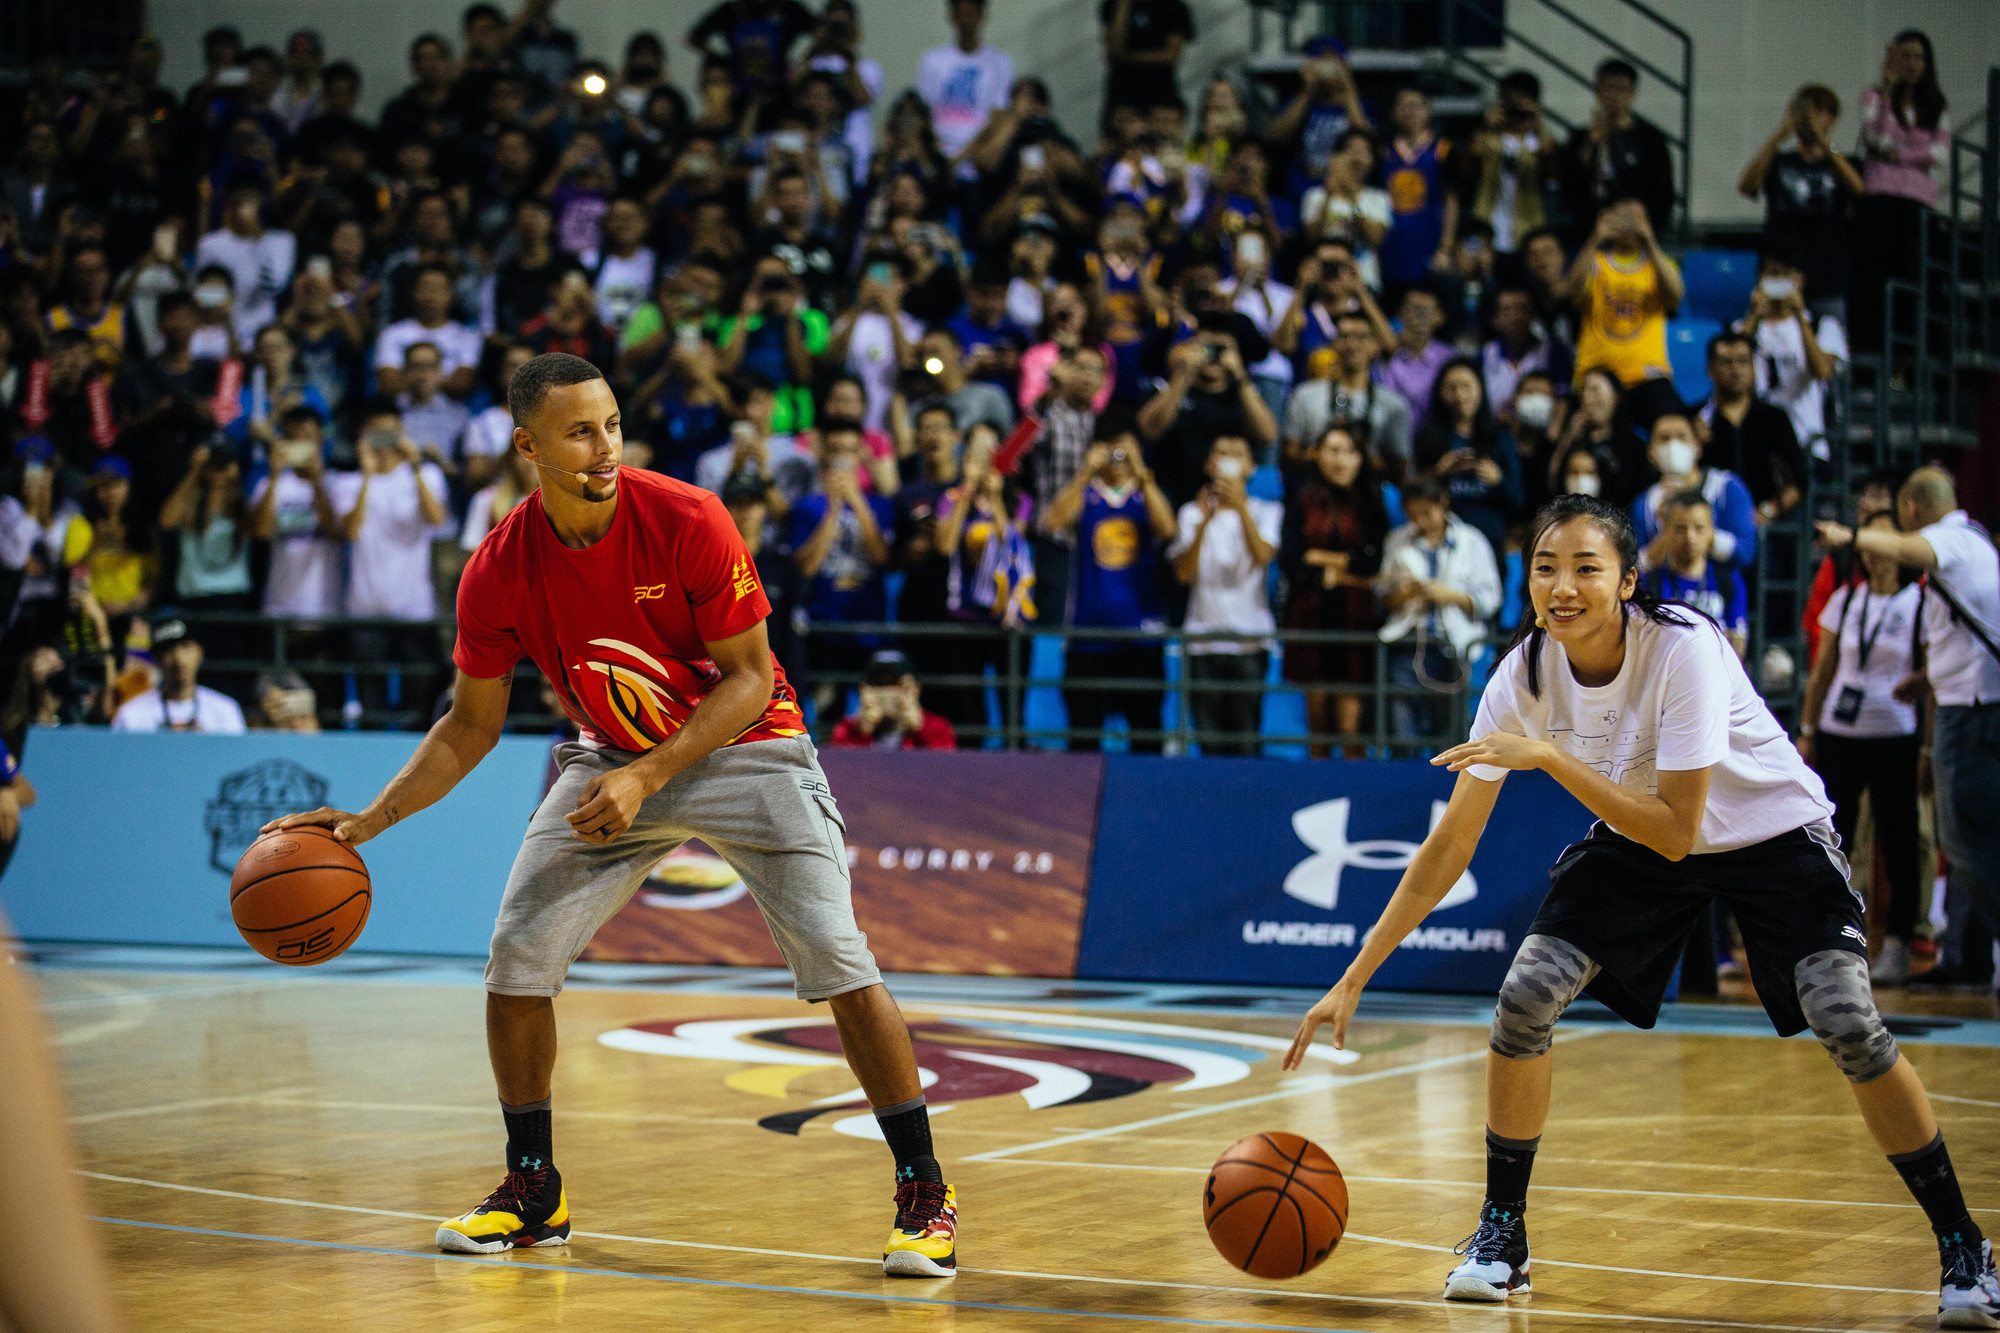 Train like Stephen Curry with Under Armour's Rush & Recovery – Will Explore  Philippines and World